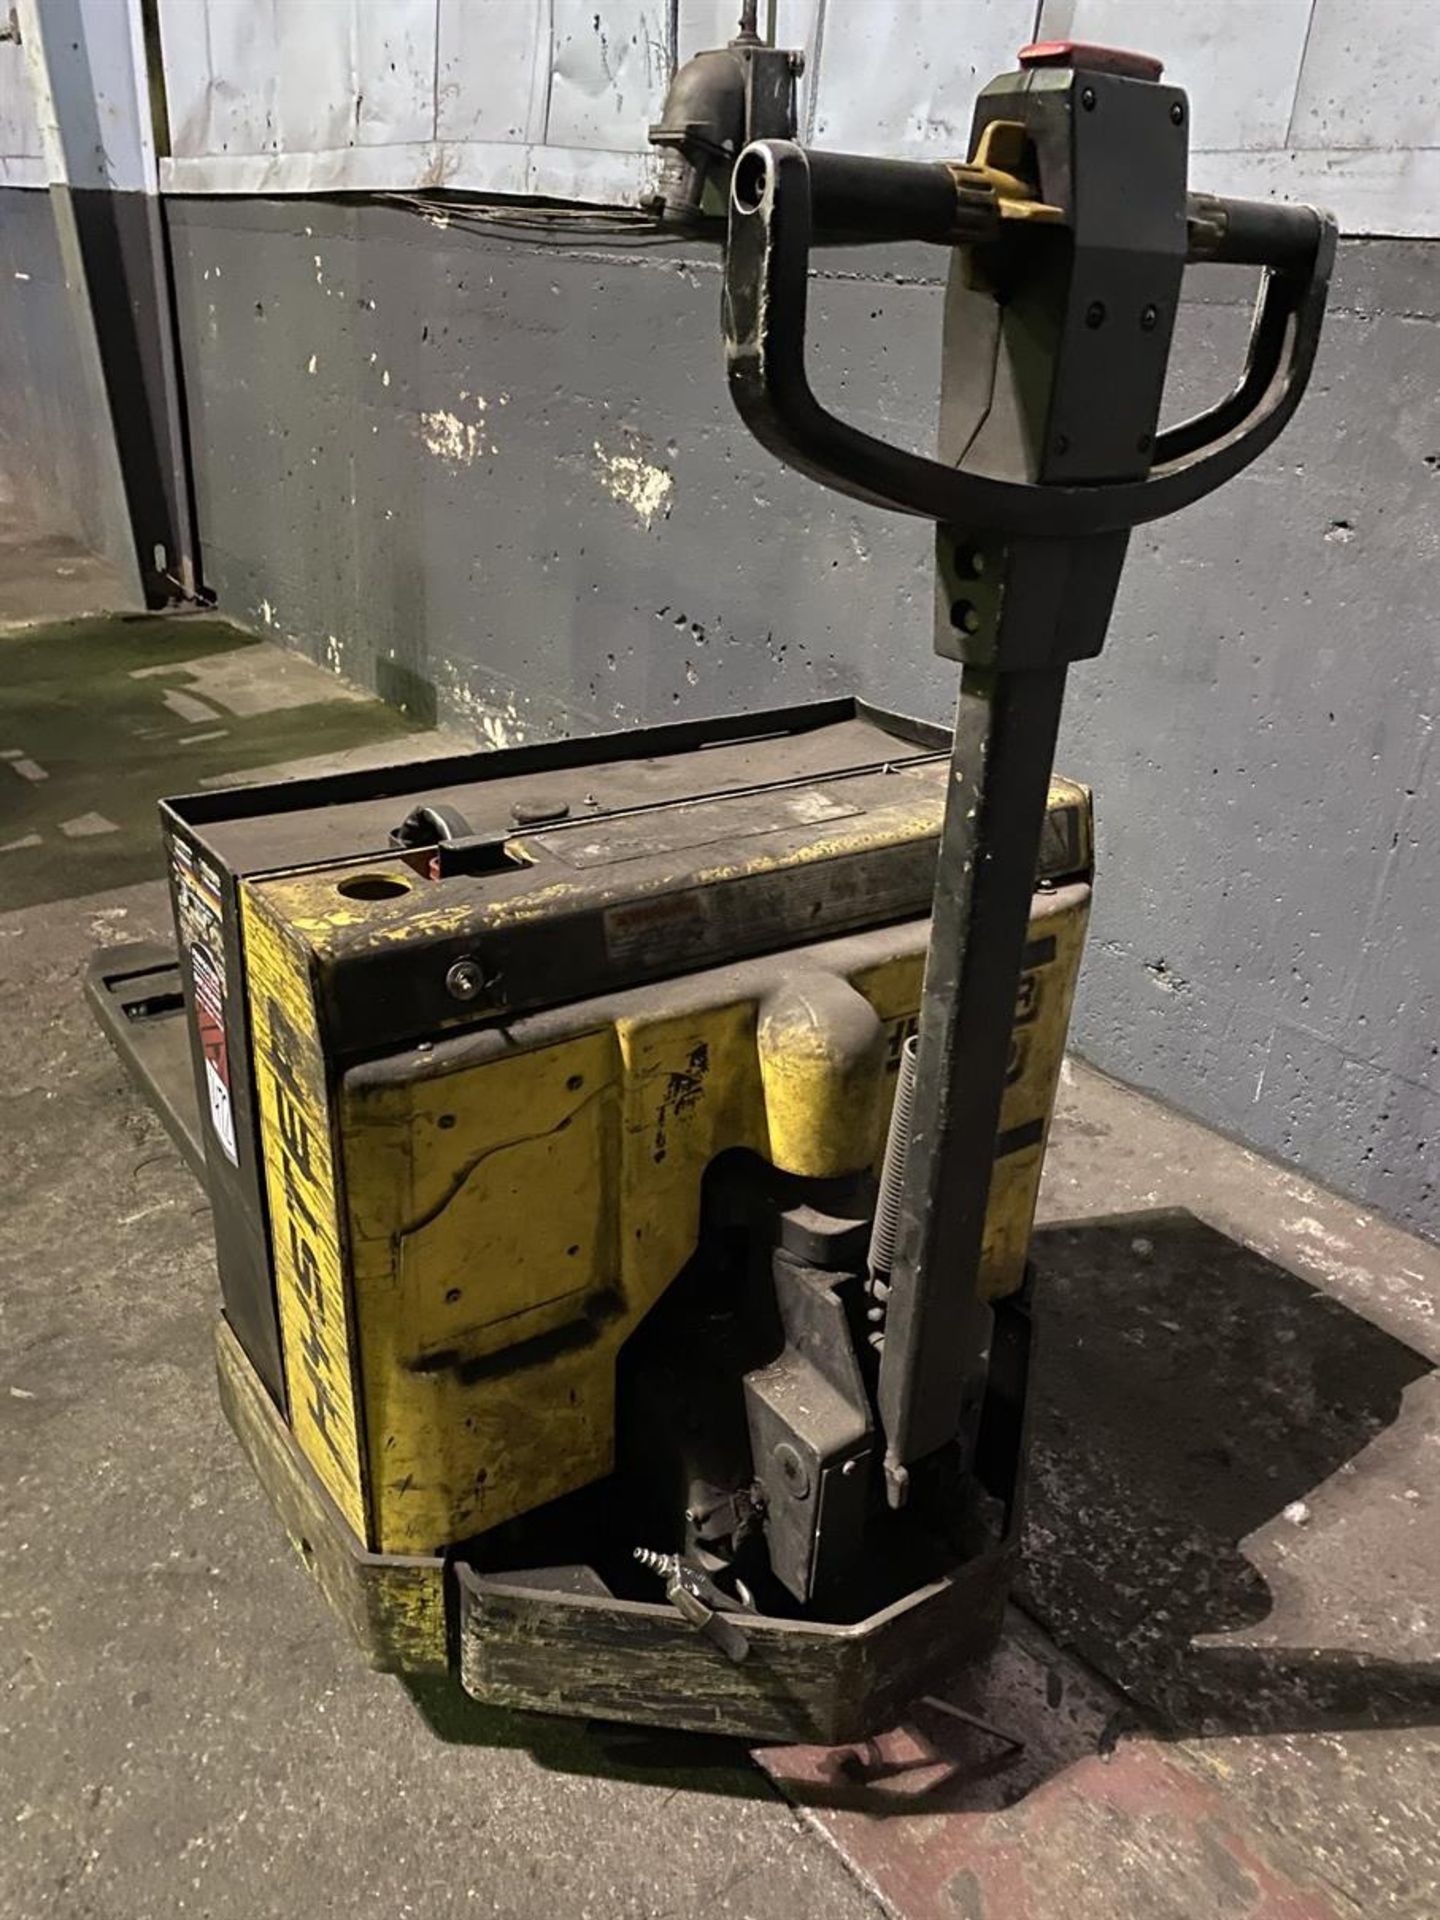 HYSTER W40XT Electric Lift Truck, s/n A218H07380Y, 4000 Lb. Capacity - Image 3 of 3